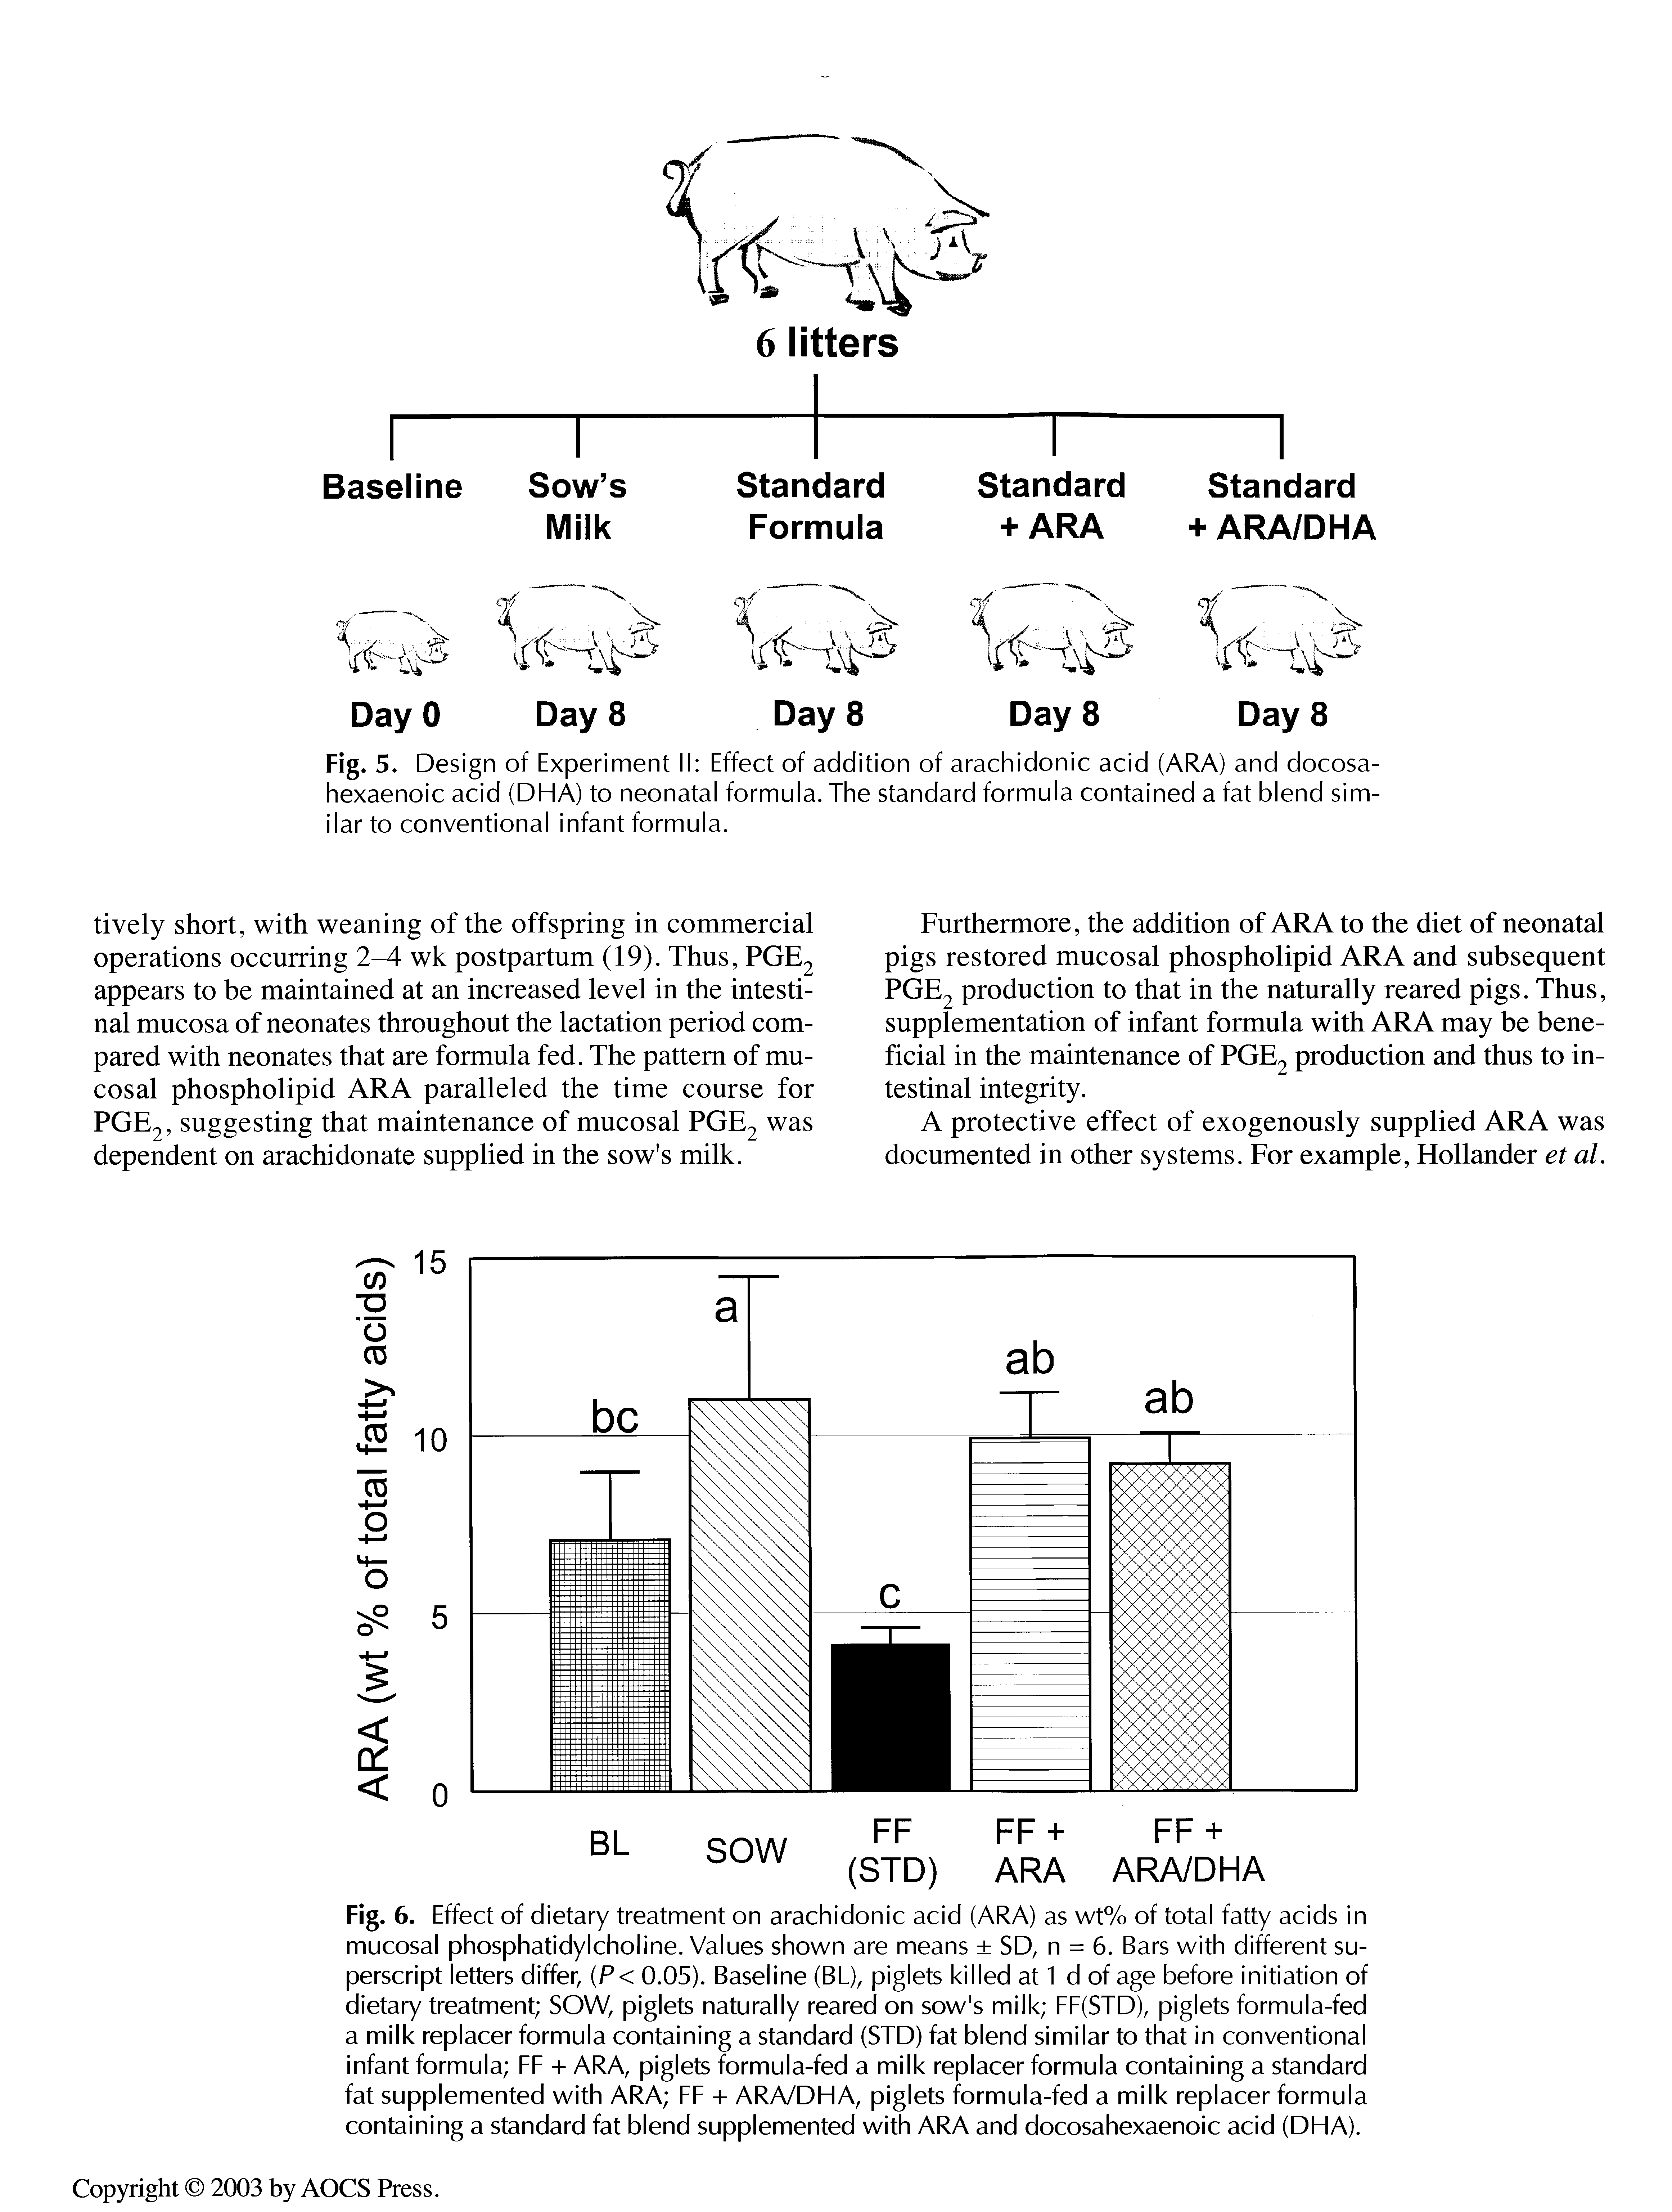 Fig. 5. Design of Experiment II Effect of addition of arachidonic acid (ARA) and docosa-hexaenoic acid (DHA) to neonatal formula. The standard formula contained a fat blend similar to conventional infant formula.